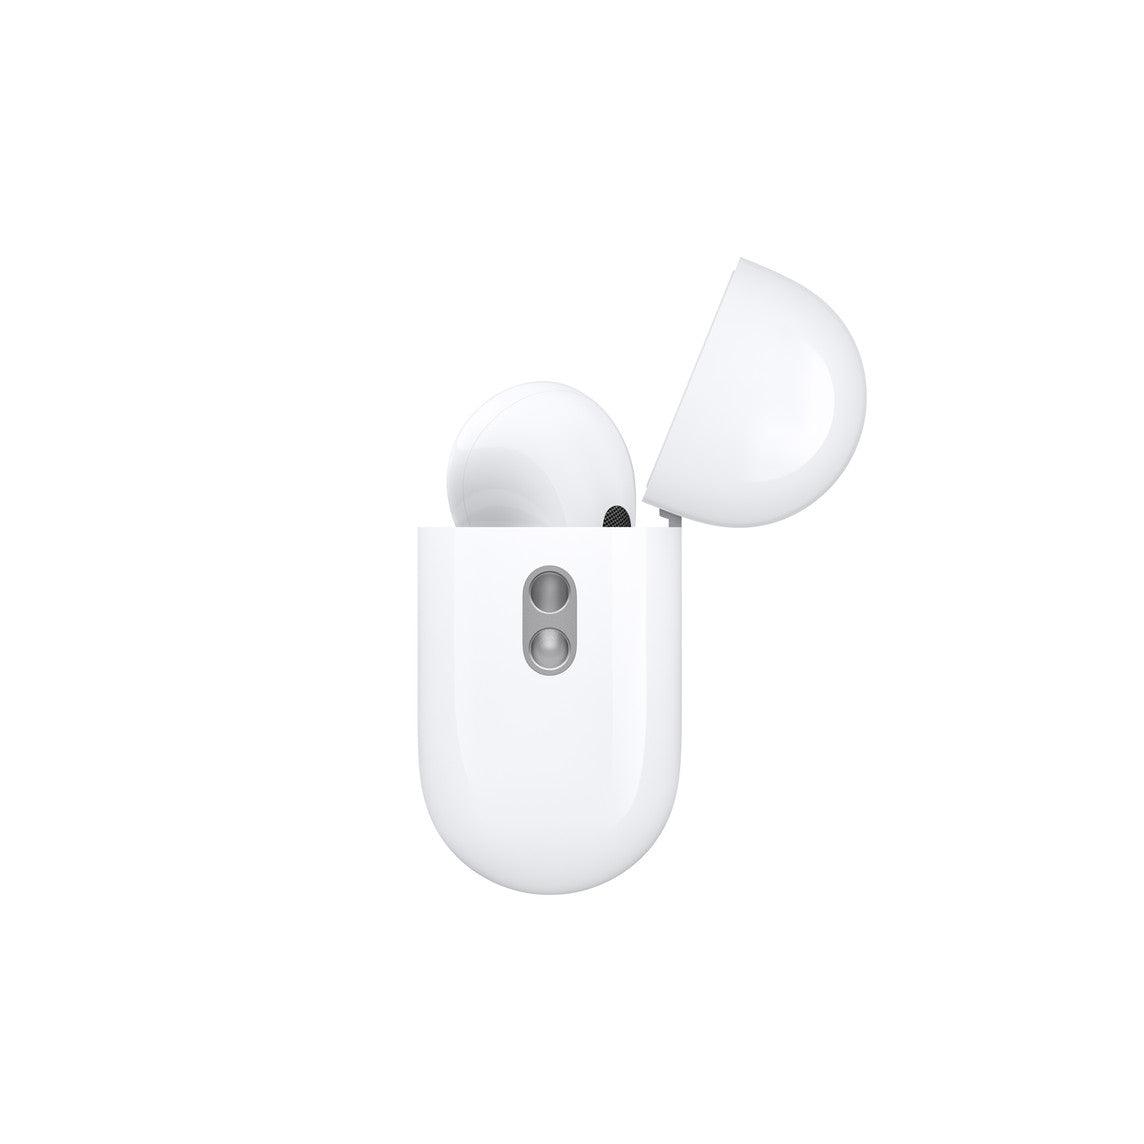 Apple AirPods Pro (2nd generation) with MagSafe Charging Case - Apple AirPods Pro (2nd generation) with MagSafe Charging Case - undefined Ennap.com